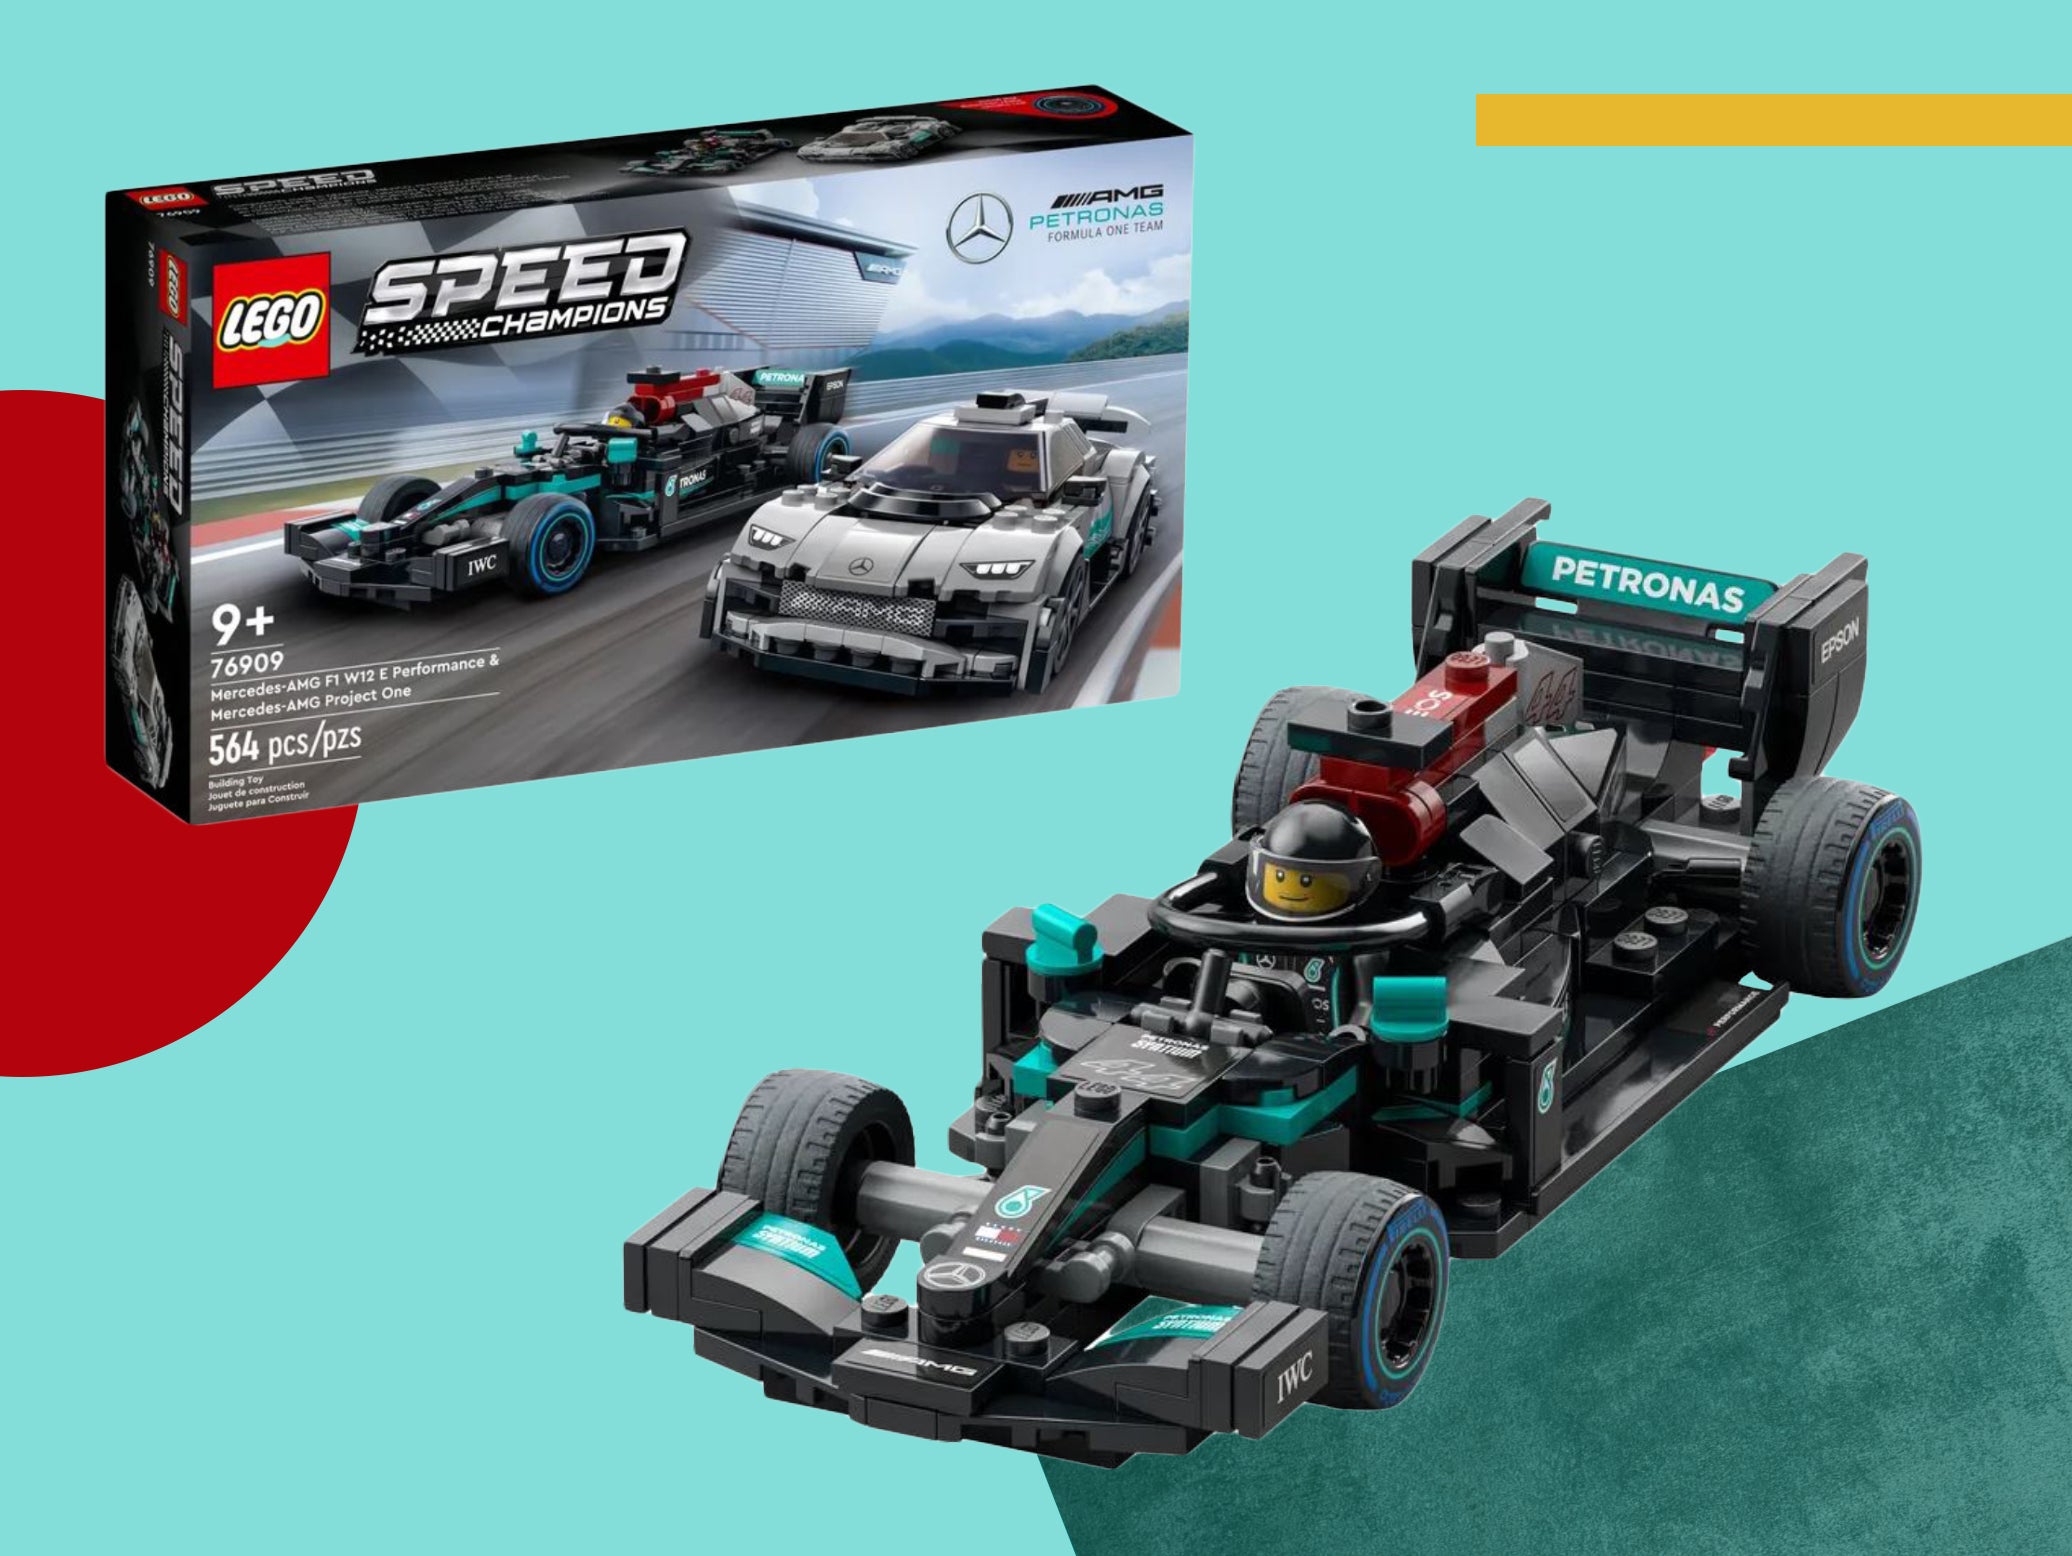 Drivers, start your engines – the build is available from 1 March